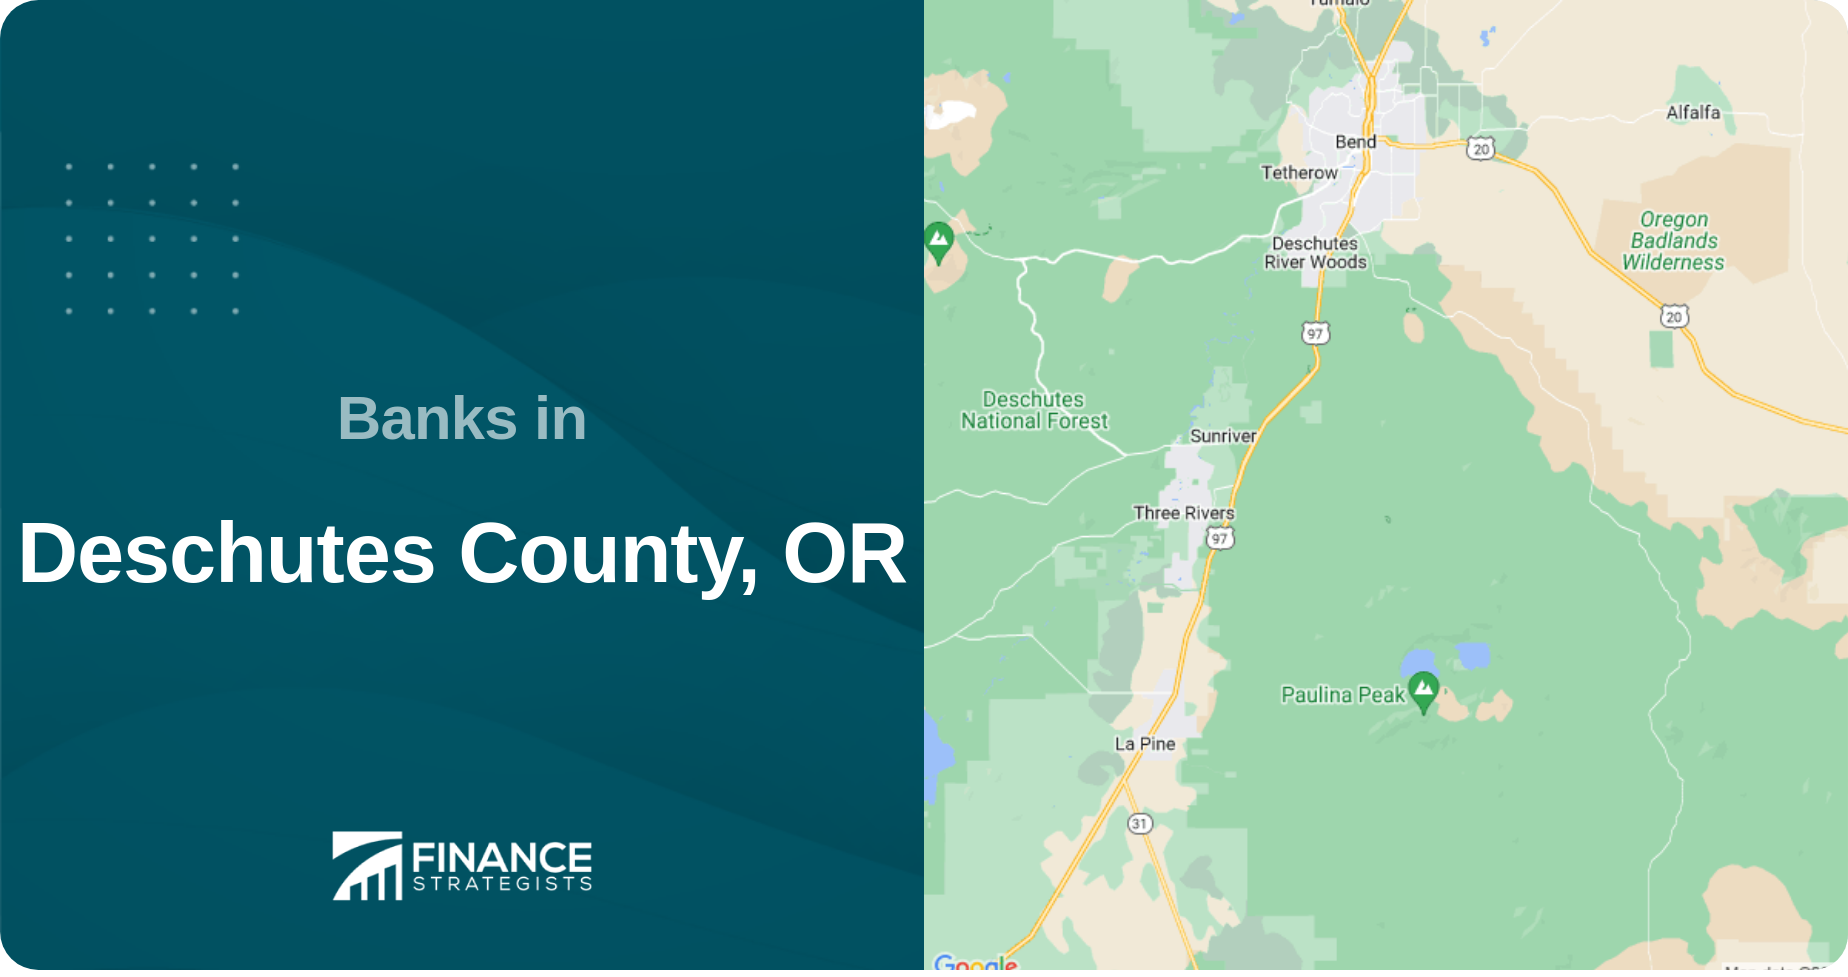 Banks in Deschutes County, OR